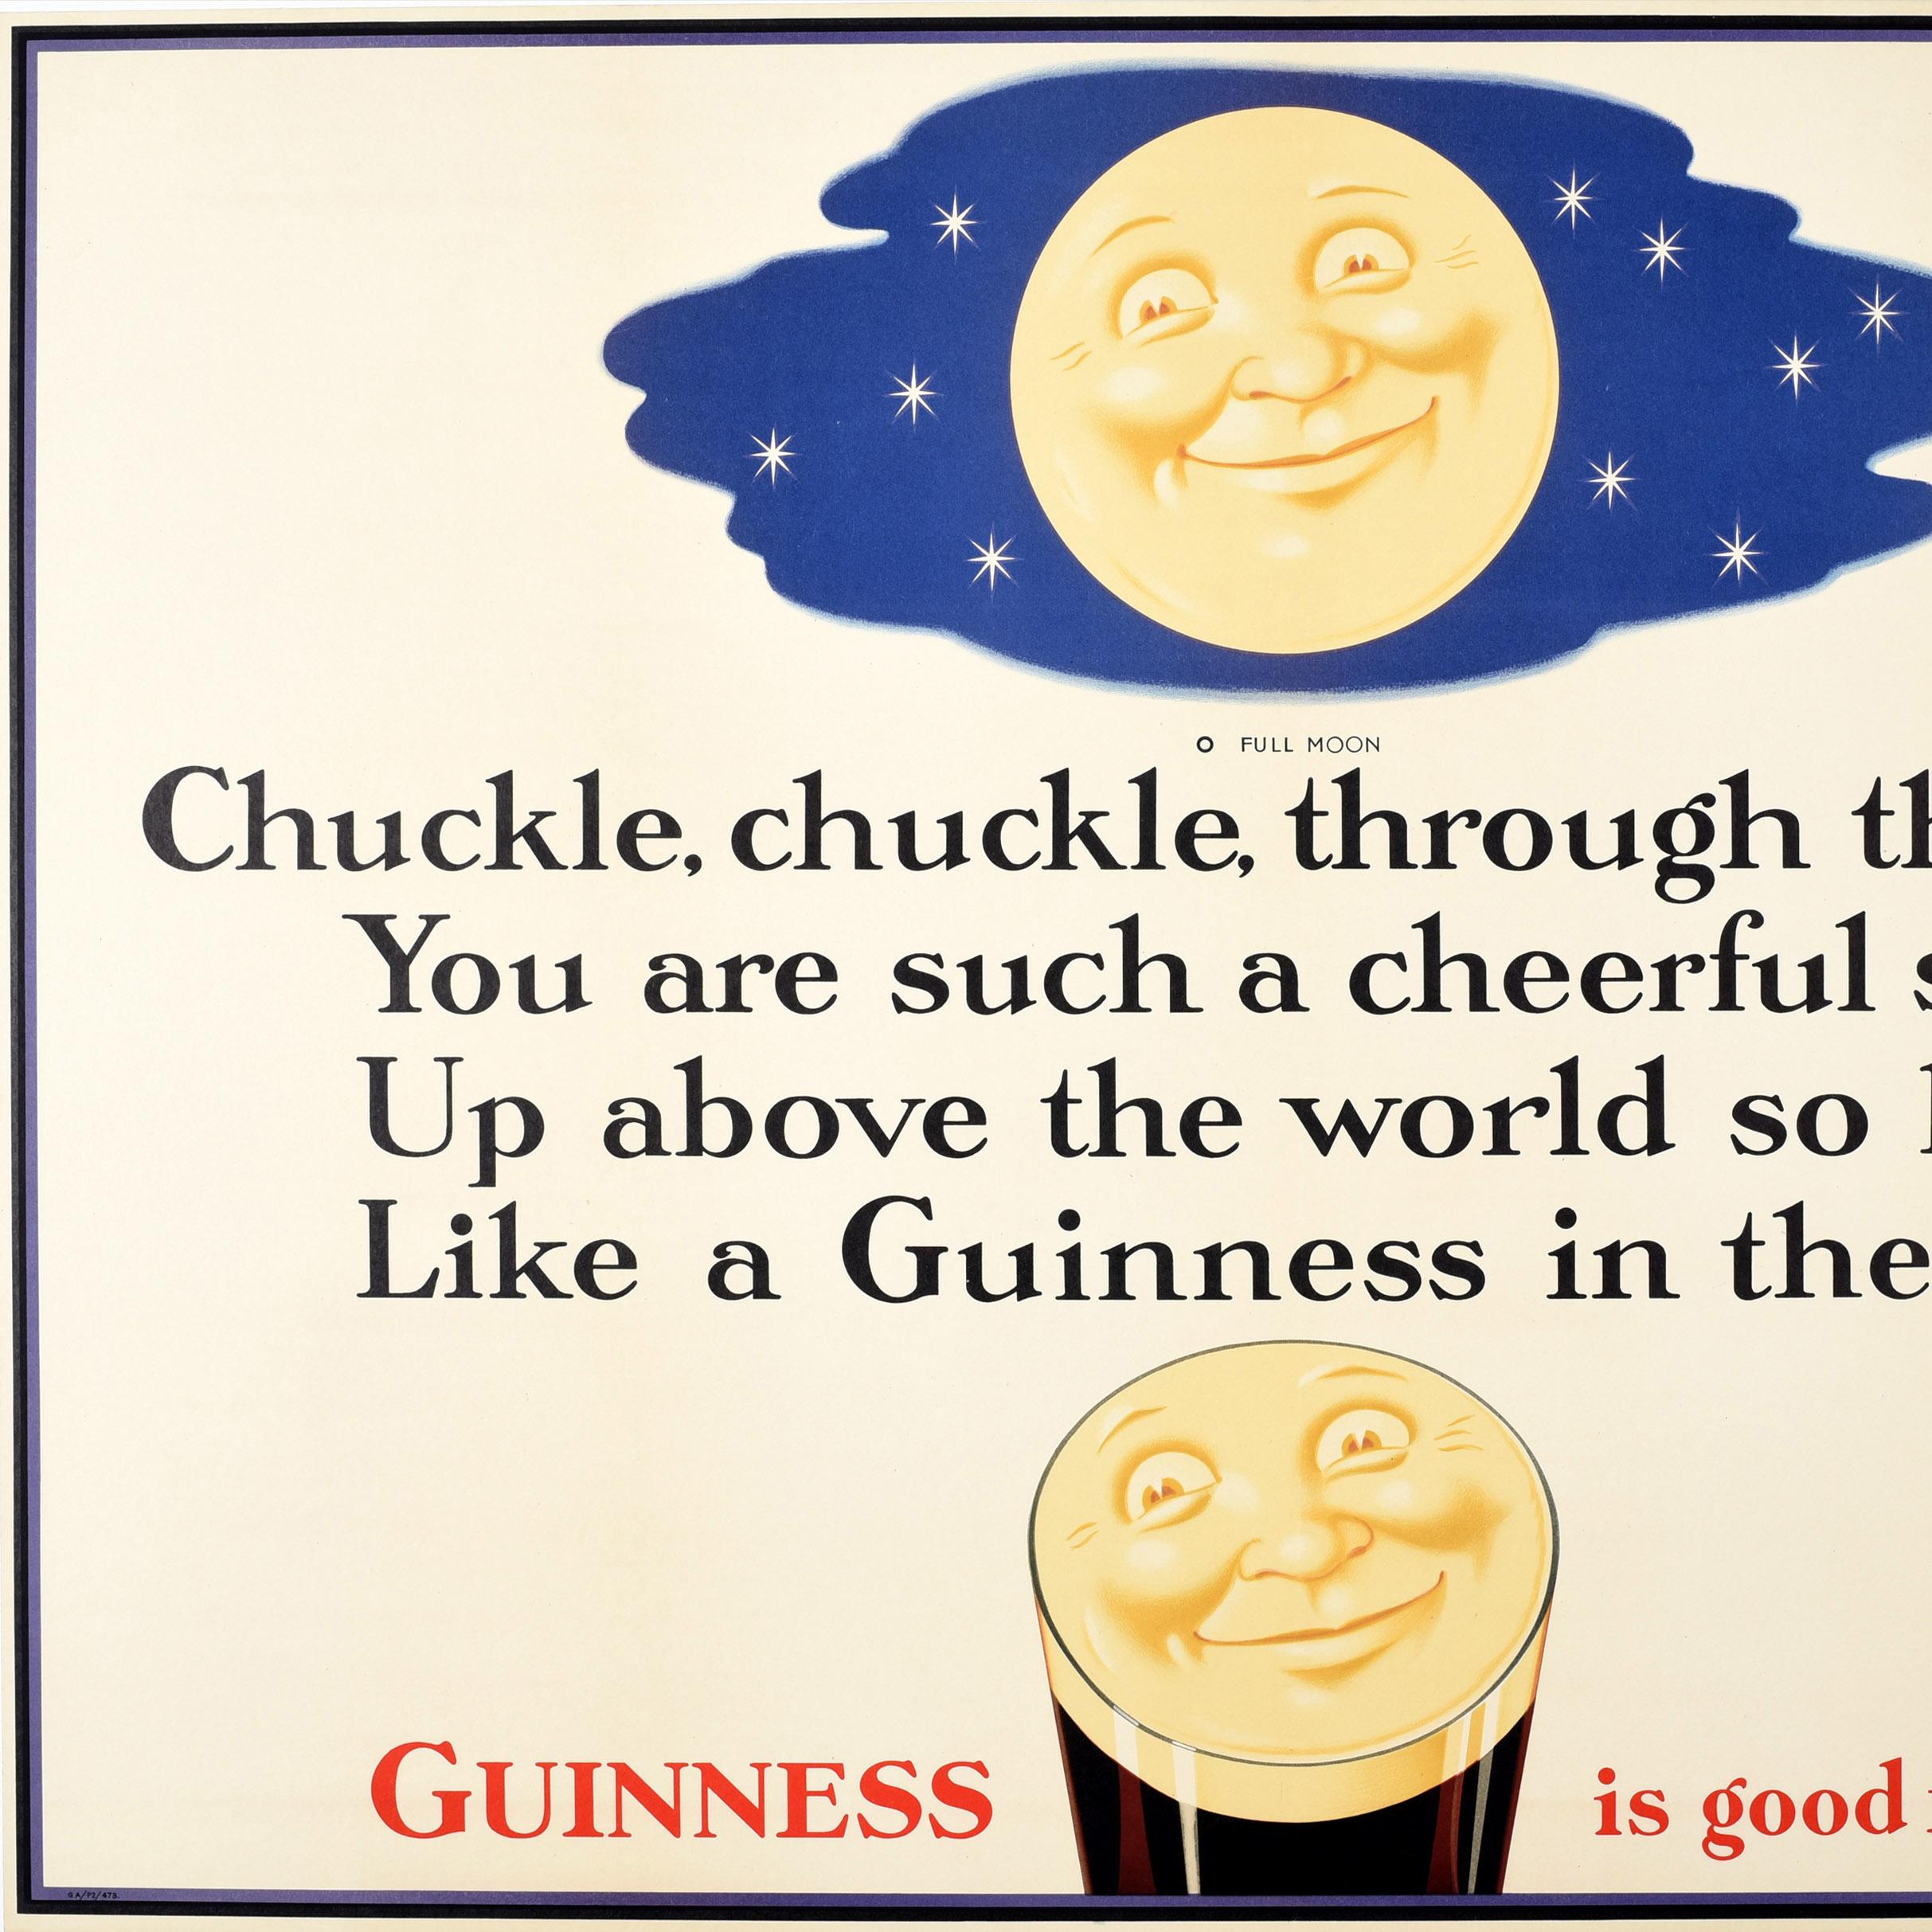 guinness is good for you poster